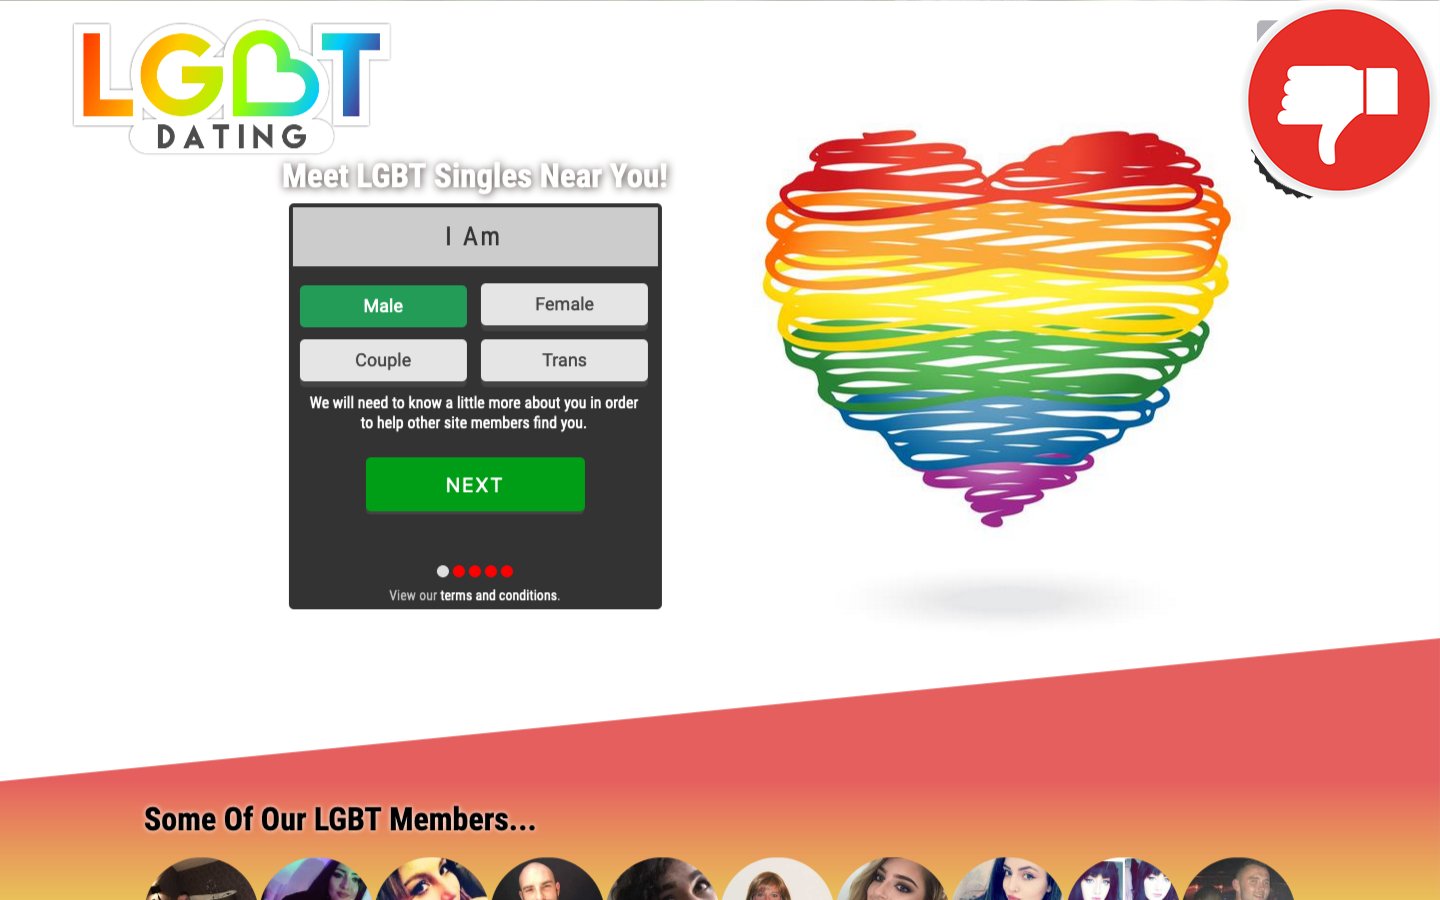 Review LGBTDating.co scam